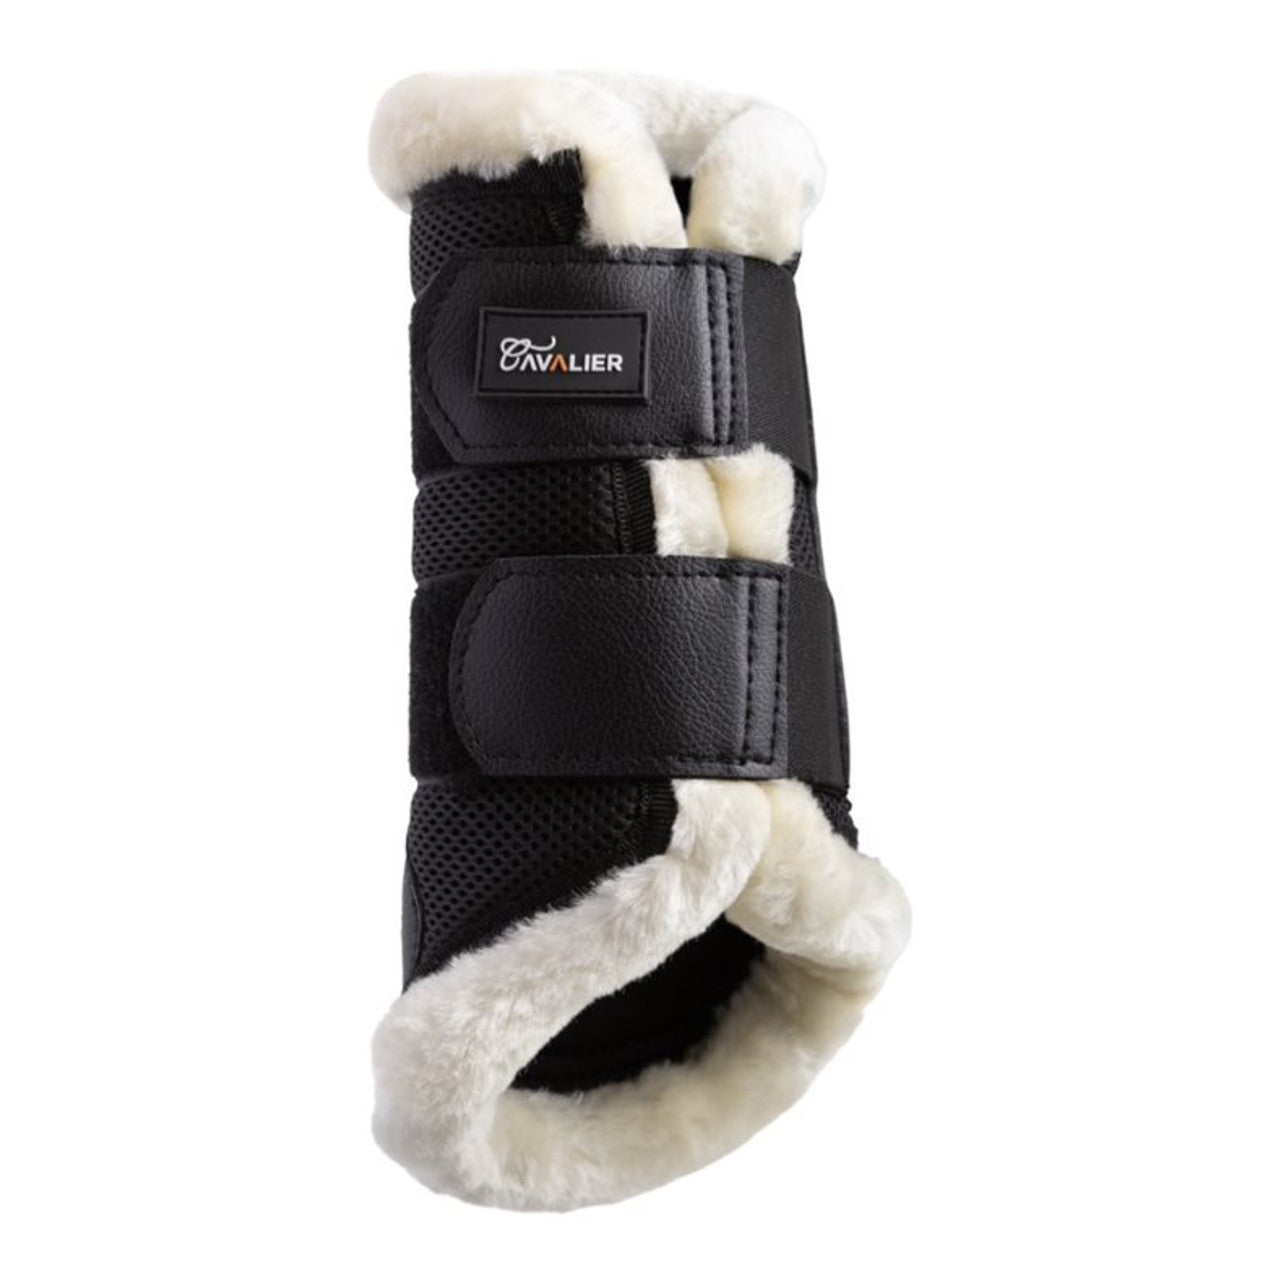 white and black horse boots with fluffy lining and mesh fabric